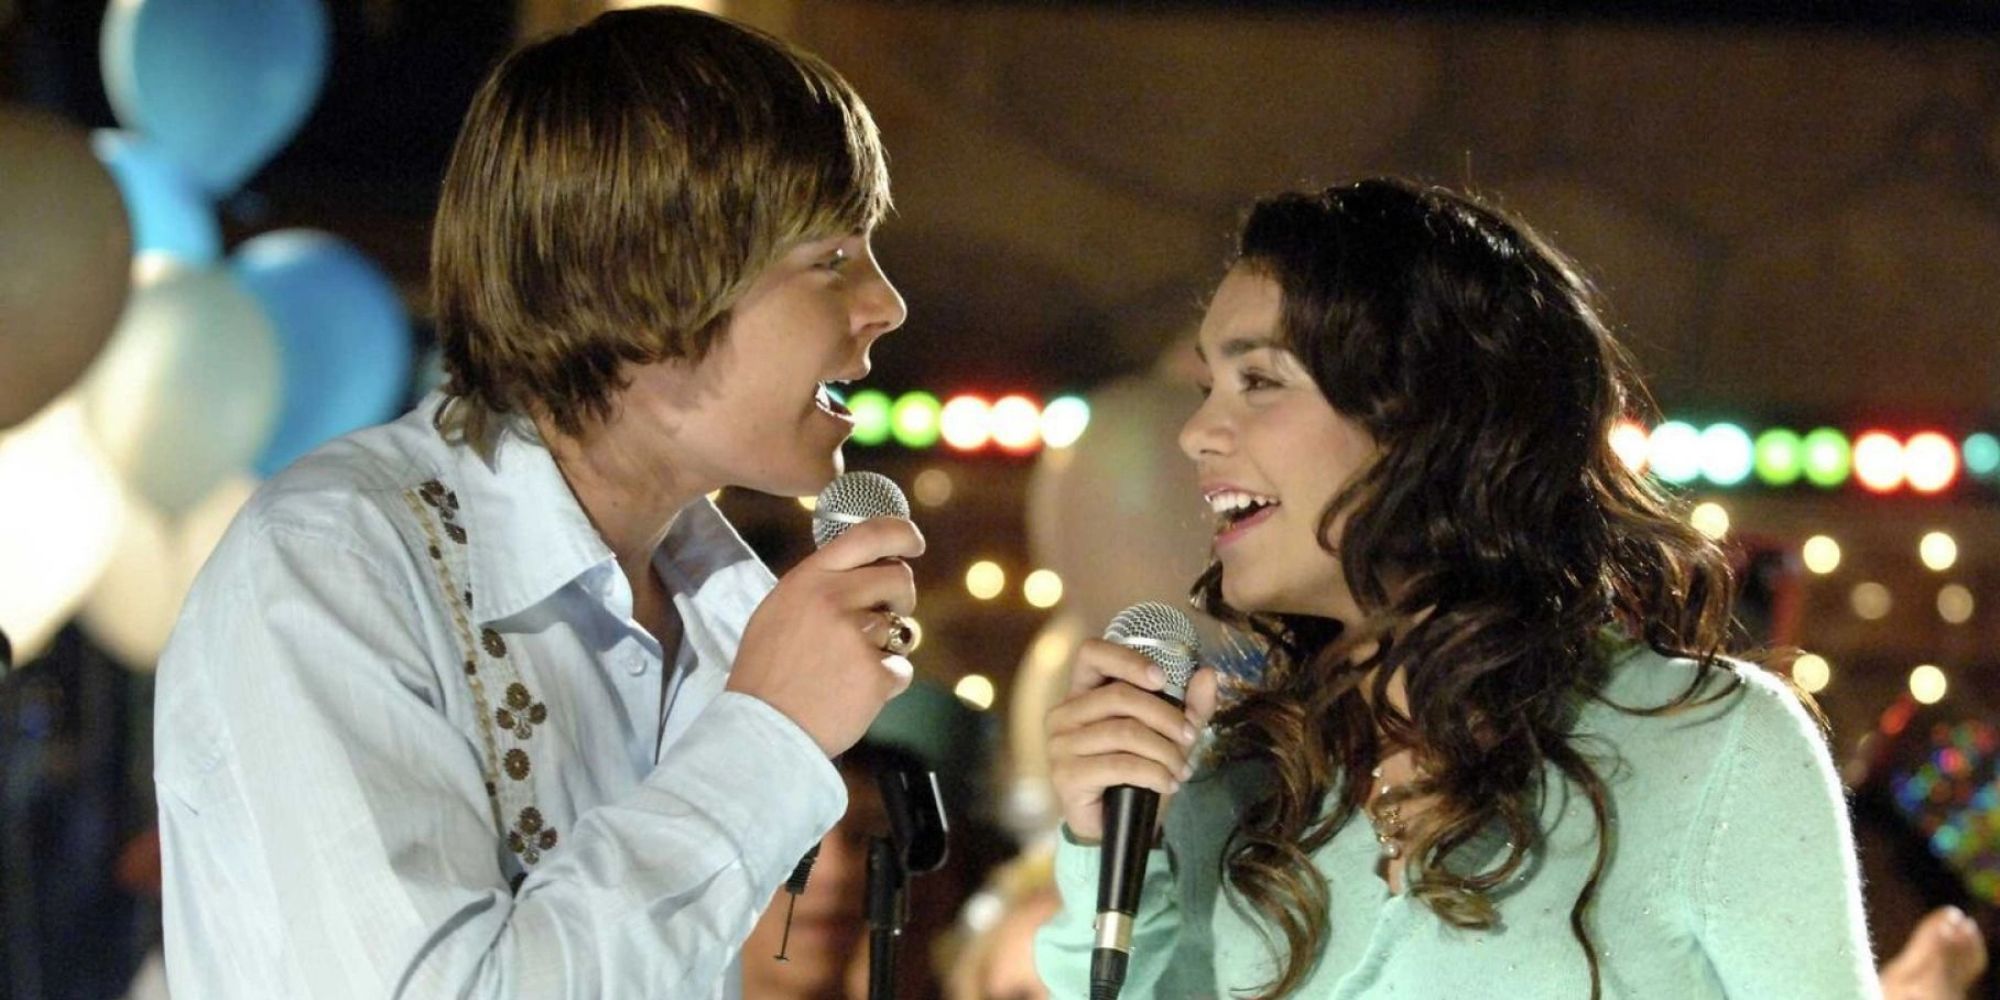 Zac Efron as Troy Bolton singing with Vanessa Hudgens as Gabriela Montez in High School Musical